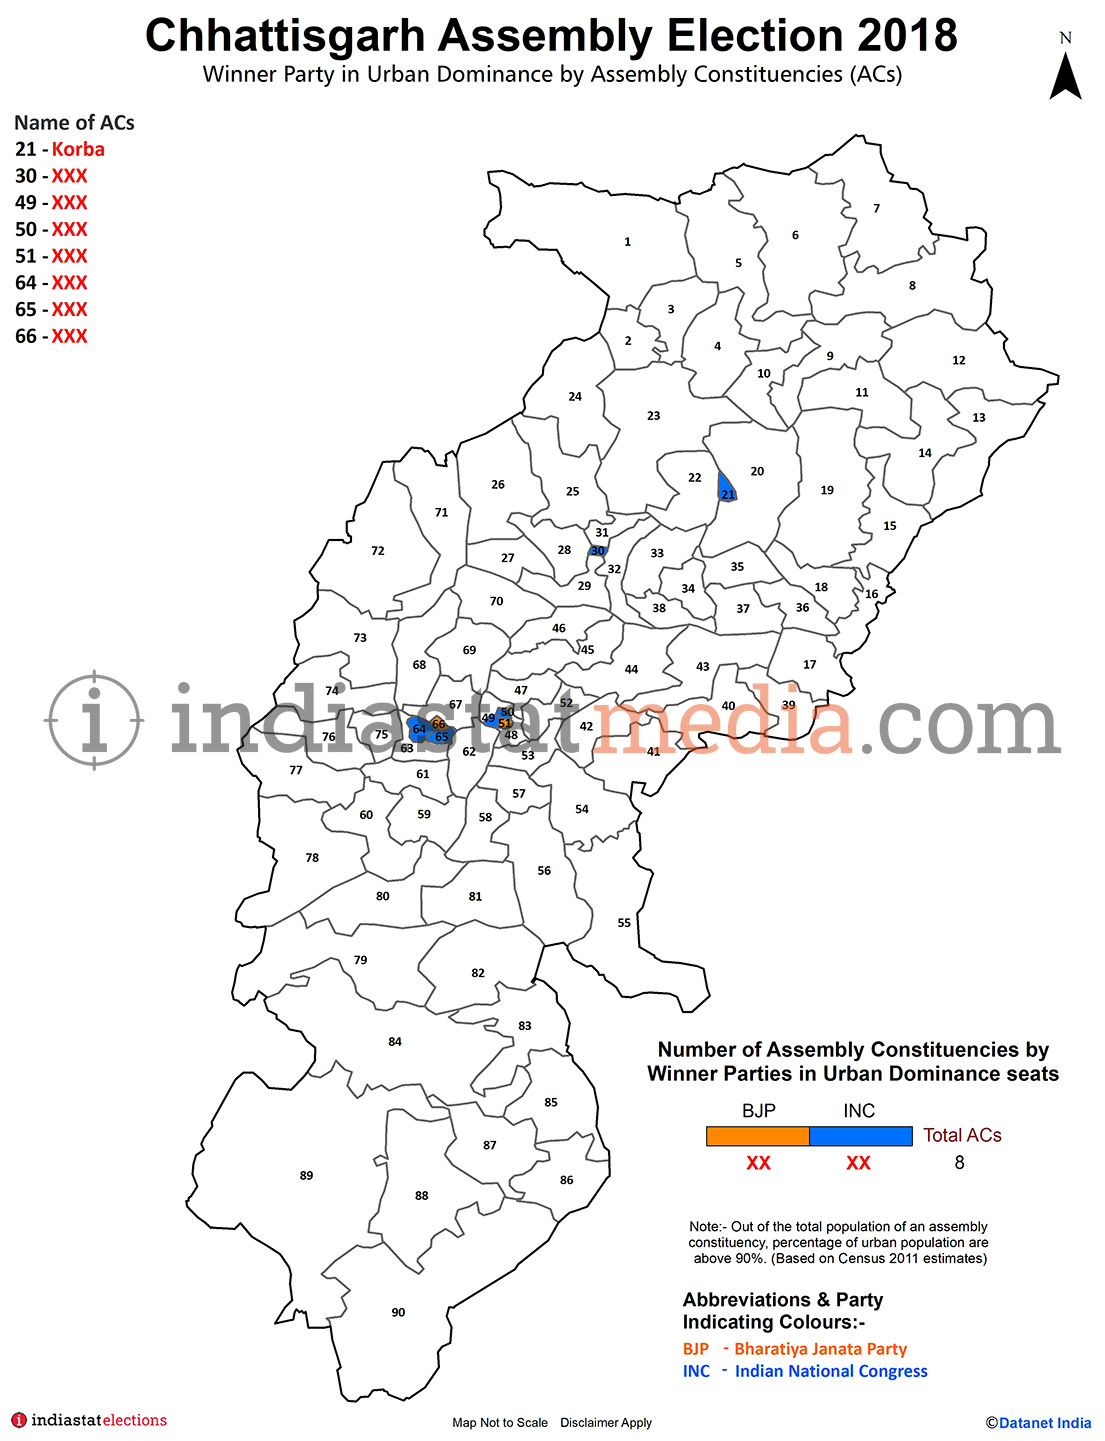 Winner Parties in Urban Dominance Constituencies in Chhattisgarh (Assembly Election - 2018)